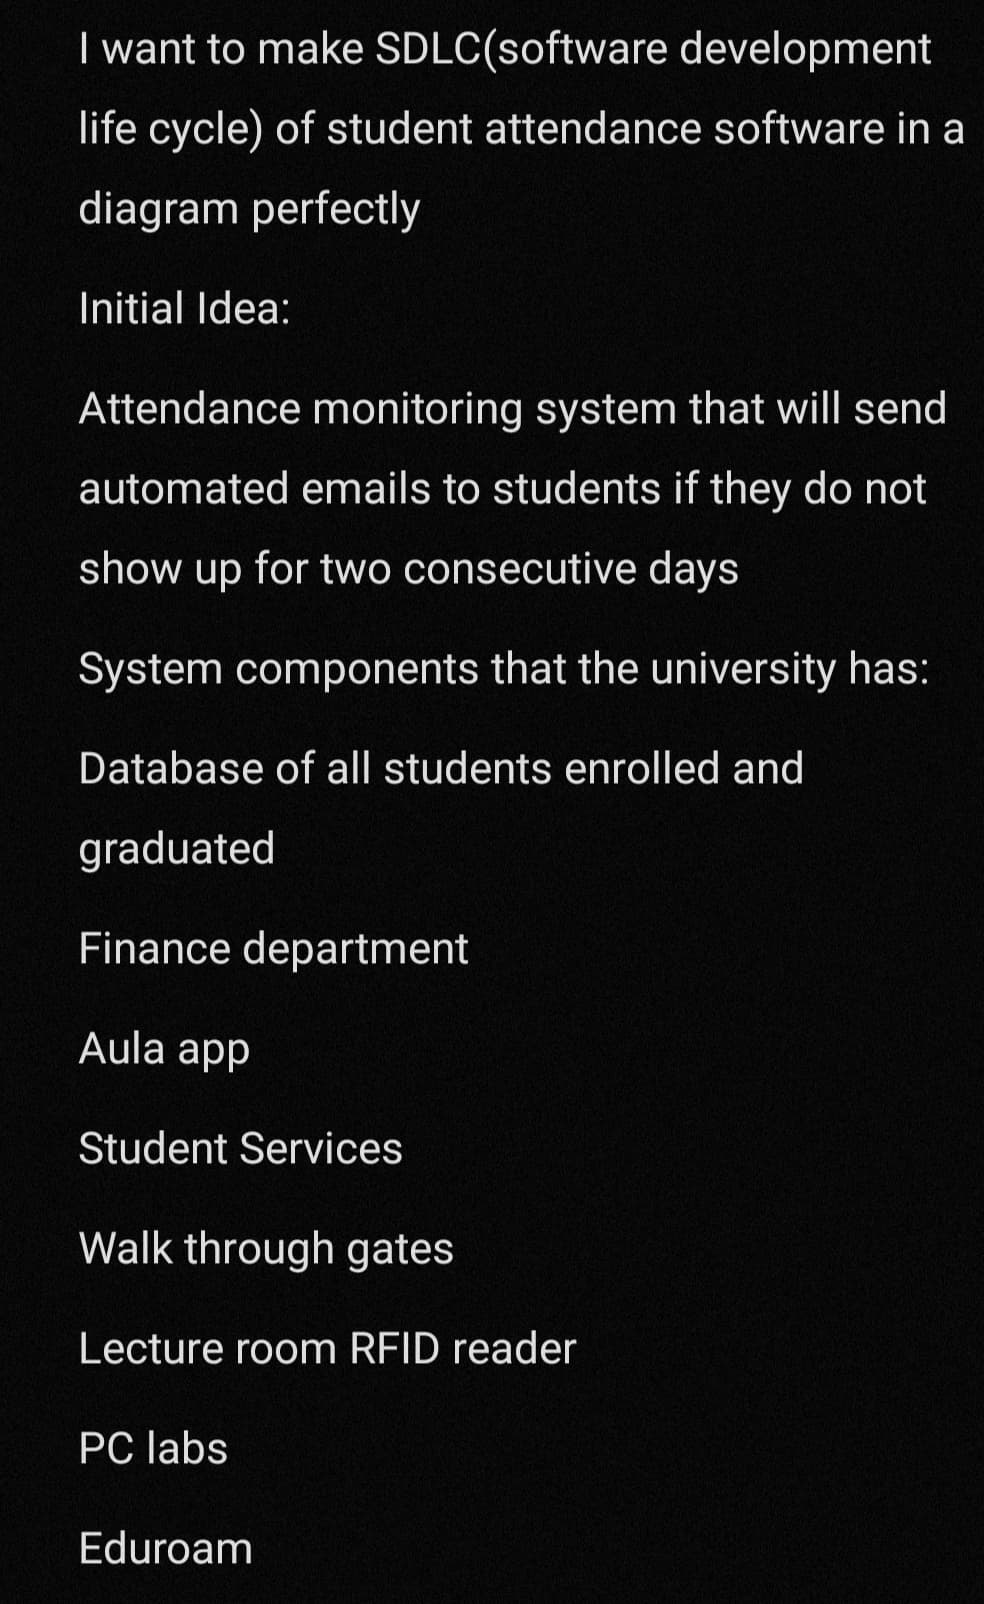 I want to make
SDLC(software development
life cycle) of student attendance software in a
diagram perfectly
Initial Idea:
Attendance monitoring system that will send
automated emails to students if they do not
show up for two consecutive days
System components that the university has:
Database of all students enrolled and
graduated
Finance department
Aula app
Student Services
Walk through gates
Lecture room RFID reader
PC labs
Eduroam